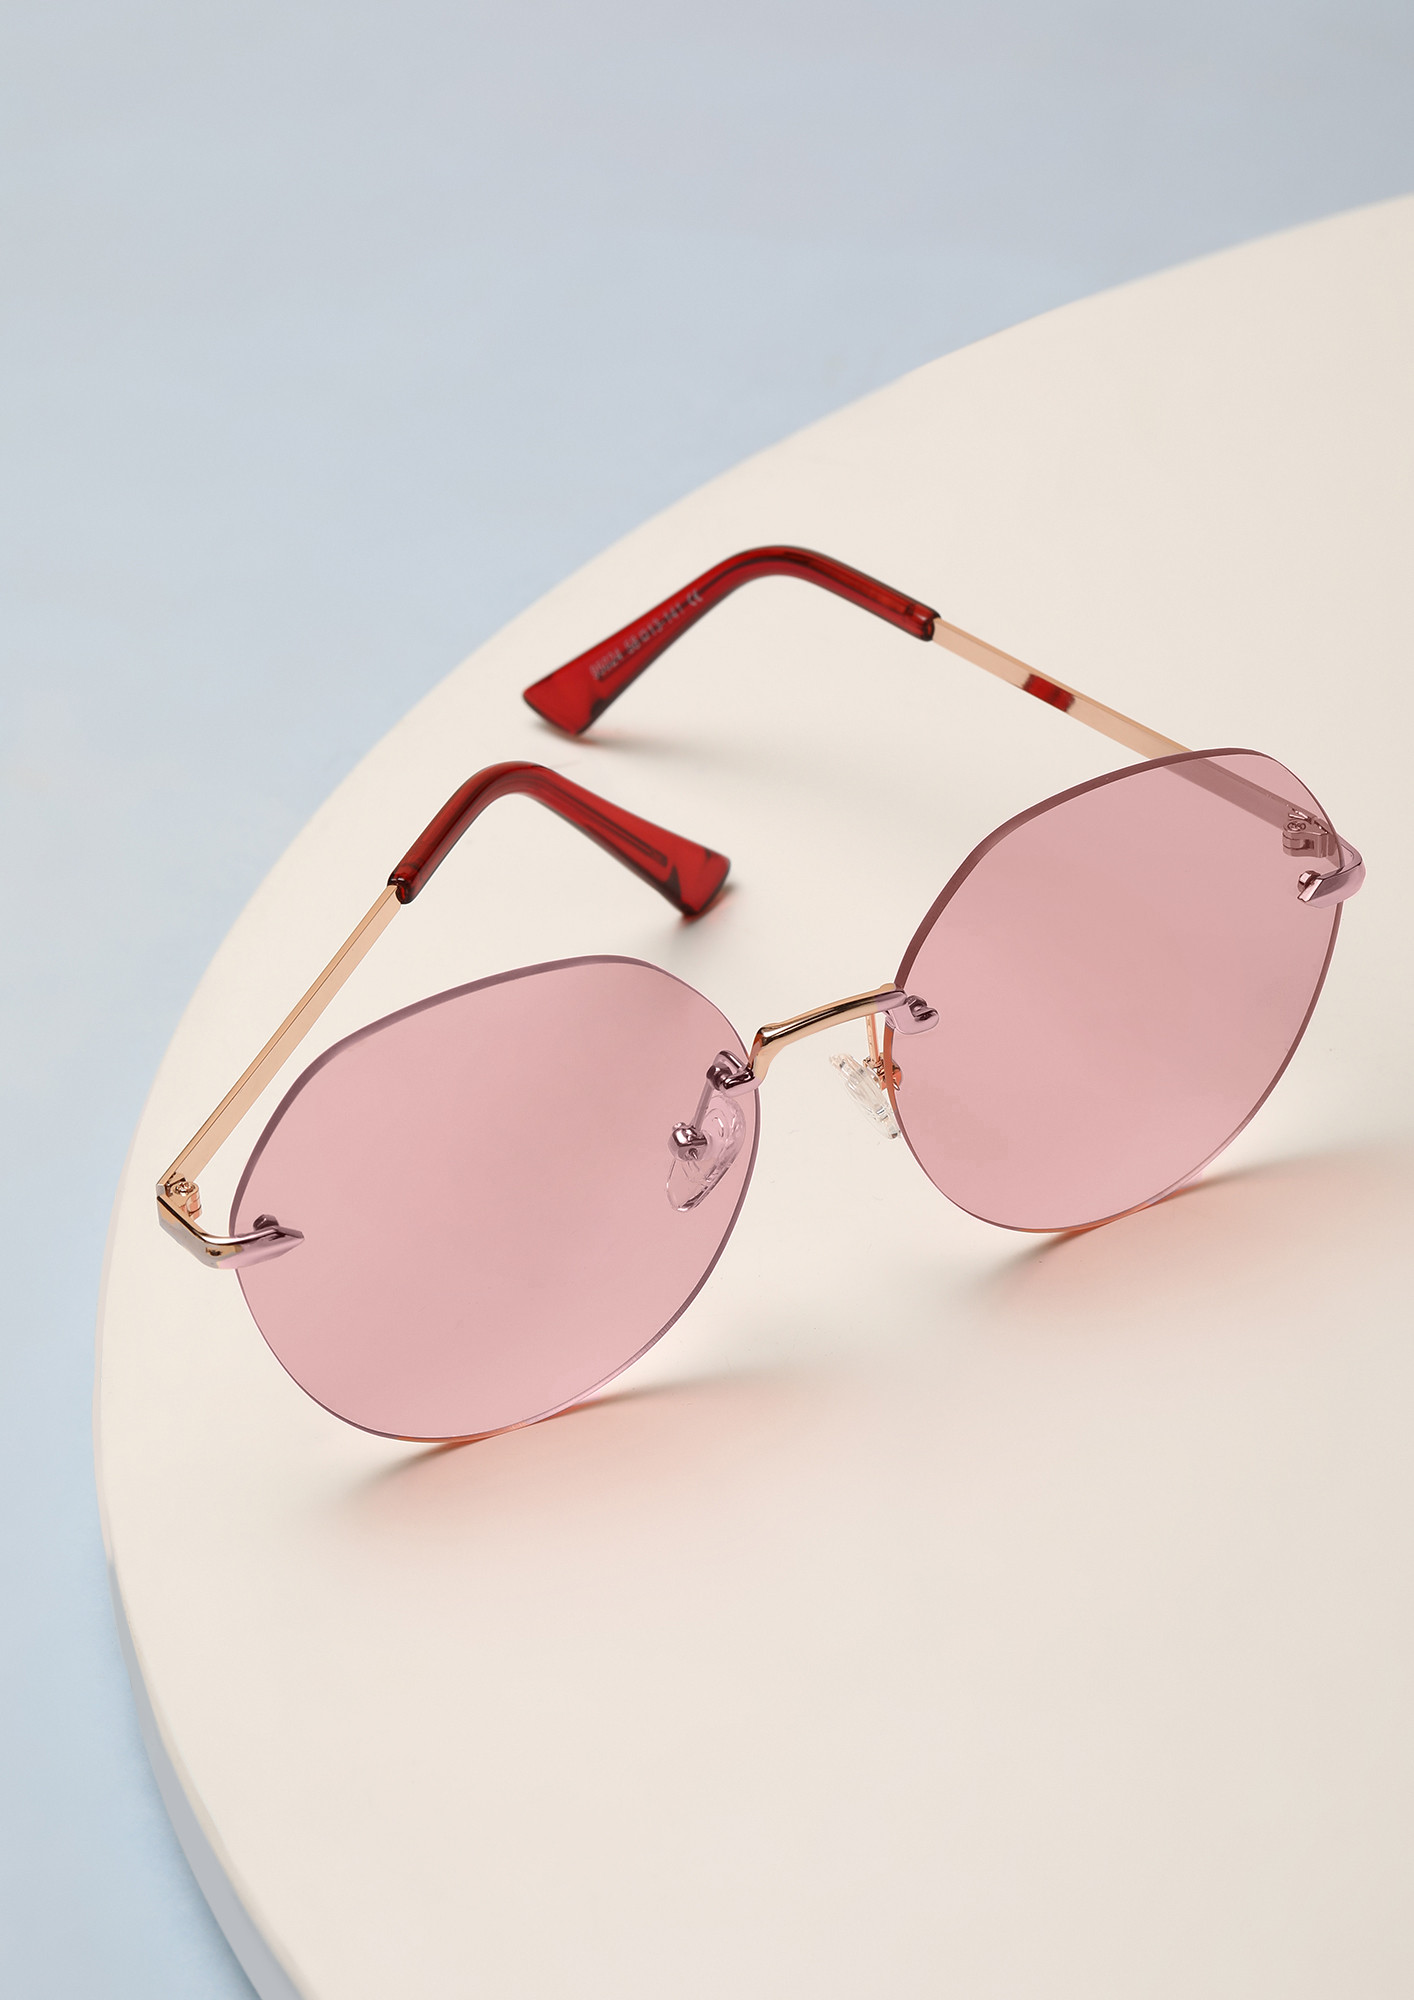 IN THE HOOD PINK ROUND SUNGLASSES